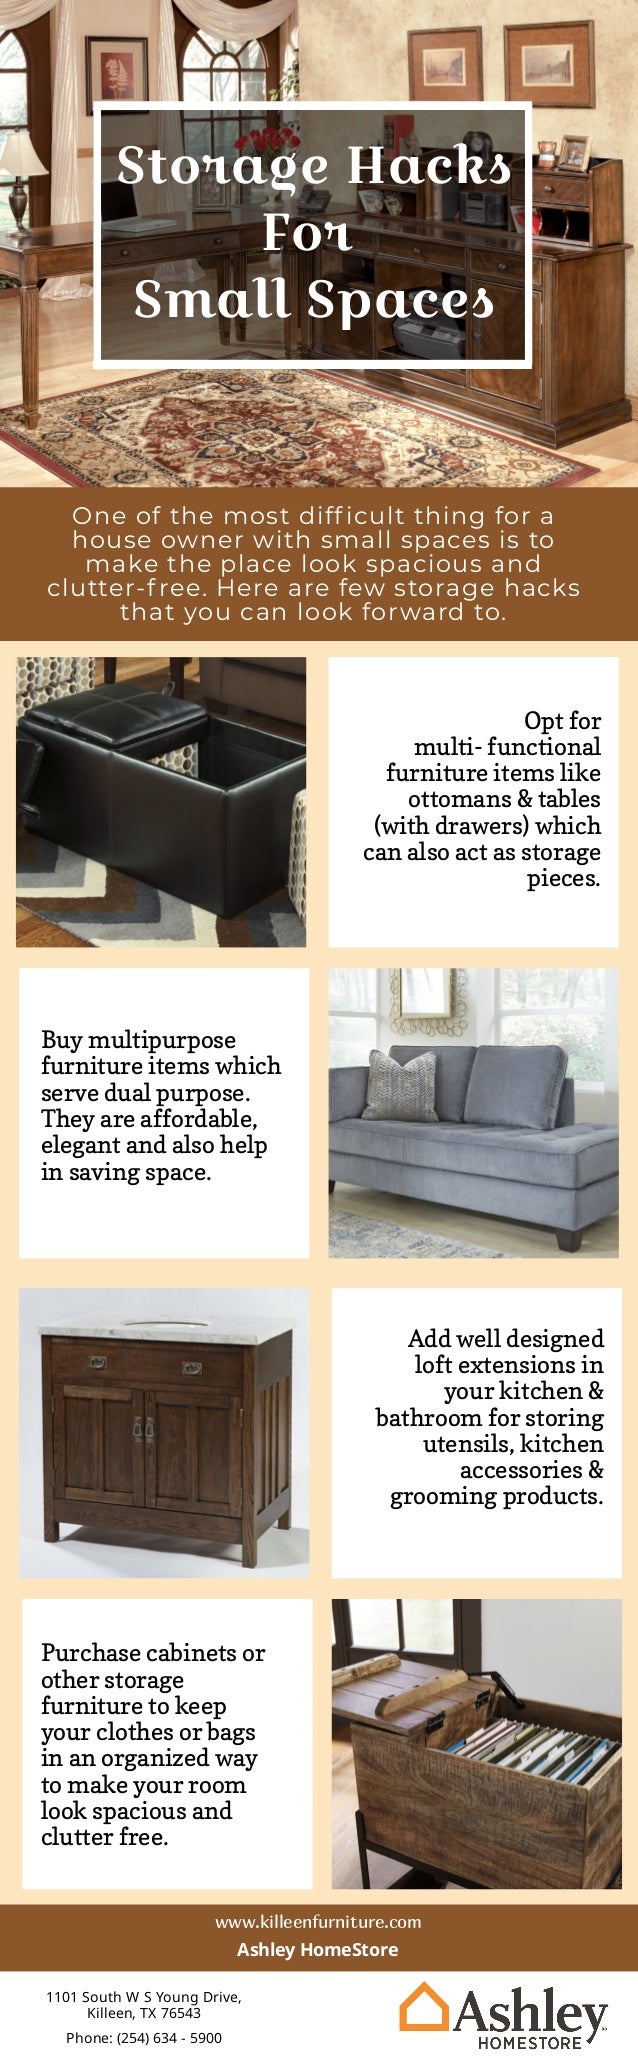 Storage Hacks For Small Spaces